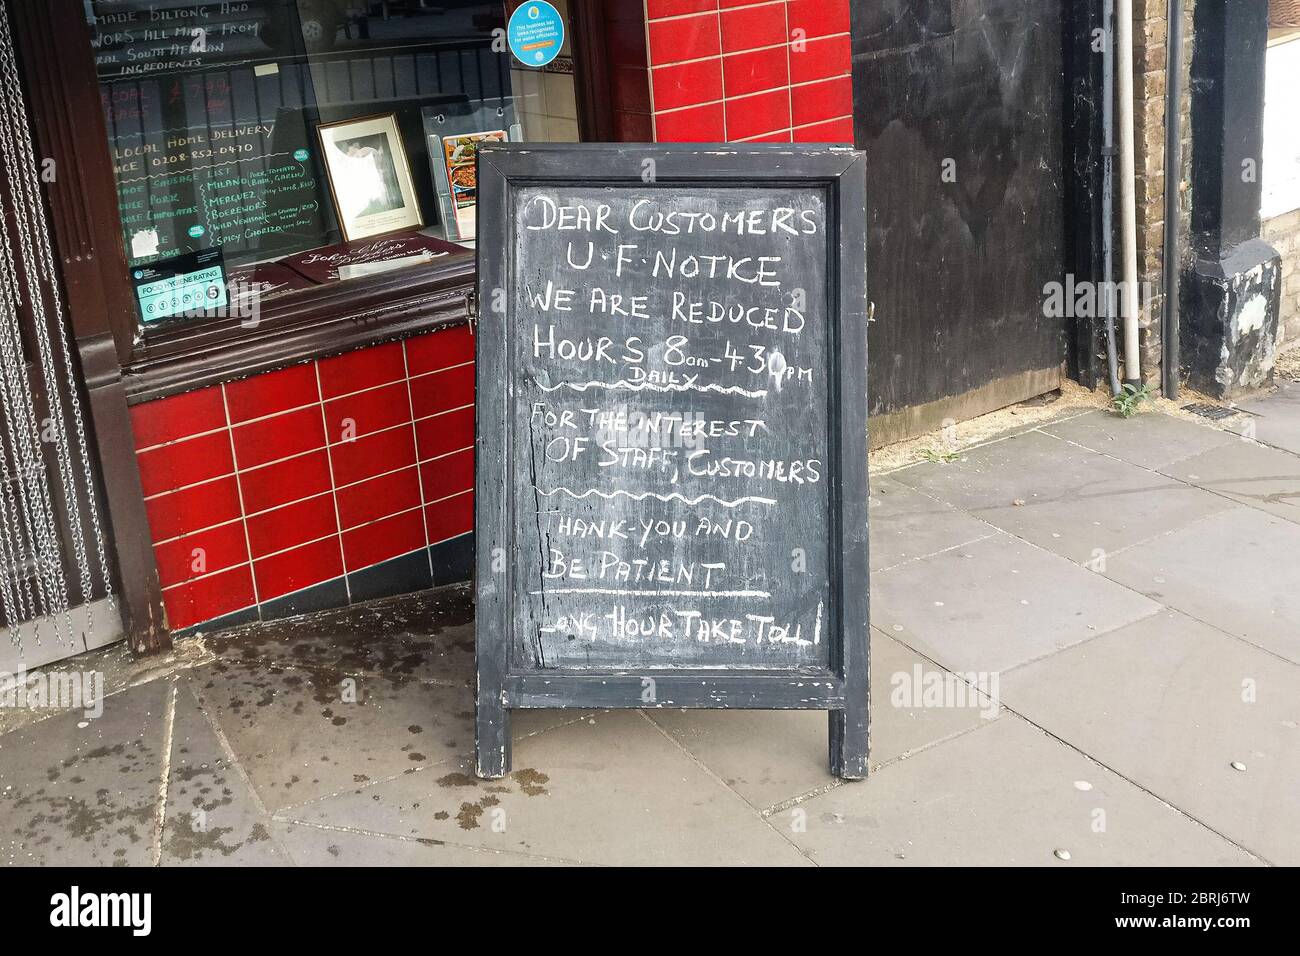 London, United Kingdom - April 27, 2020: Chalk hand written notice on blackboard in front of John Charles Butchers shop about reduced opening hours du Stock Photo